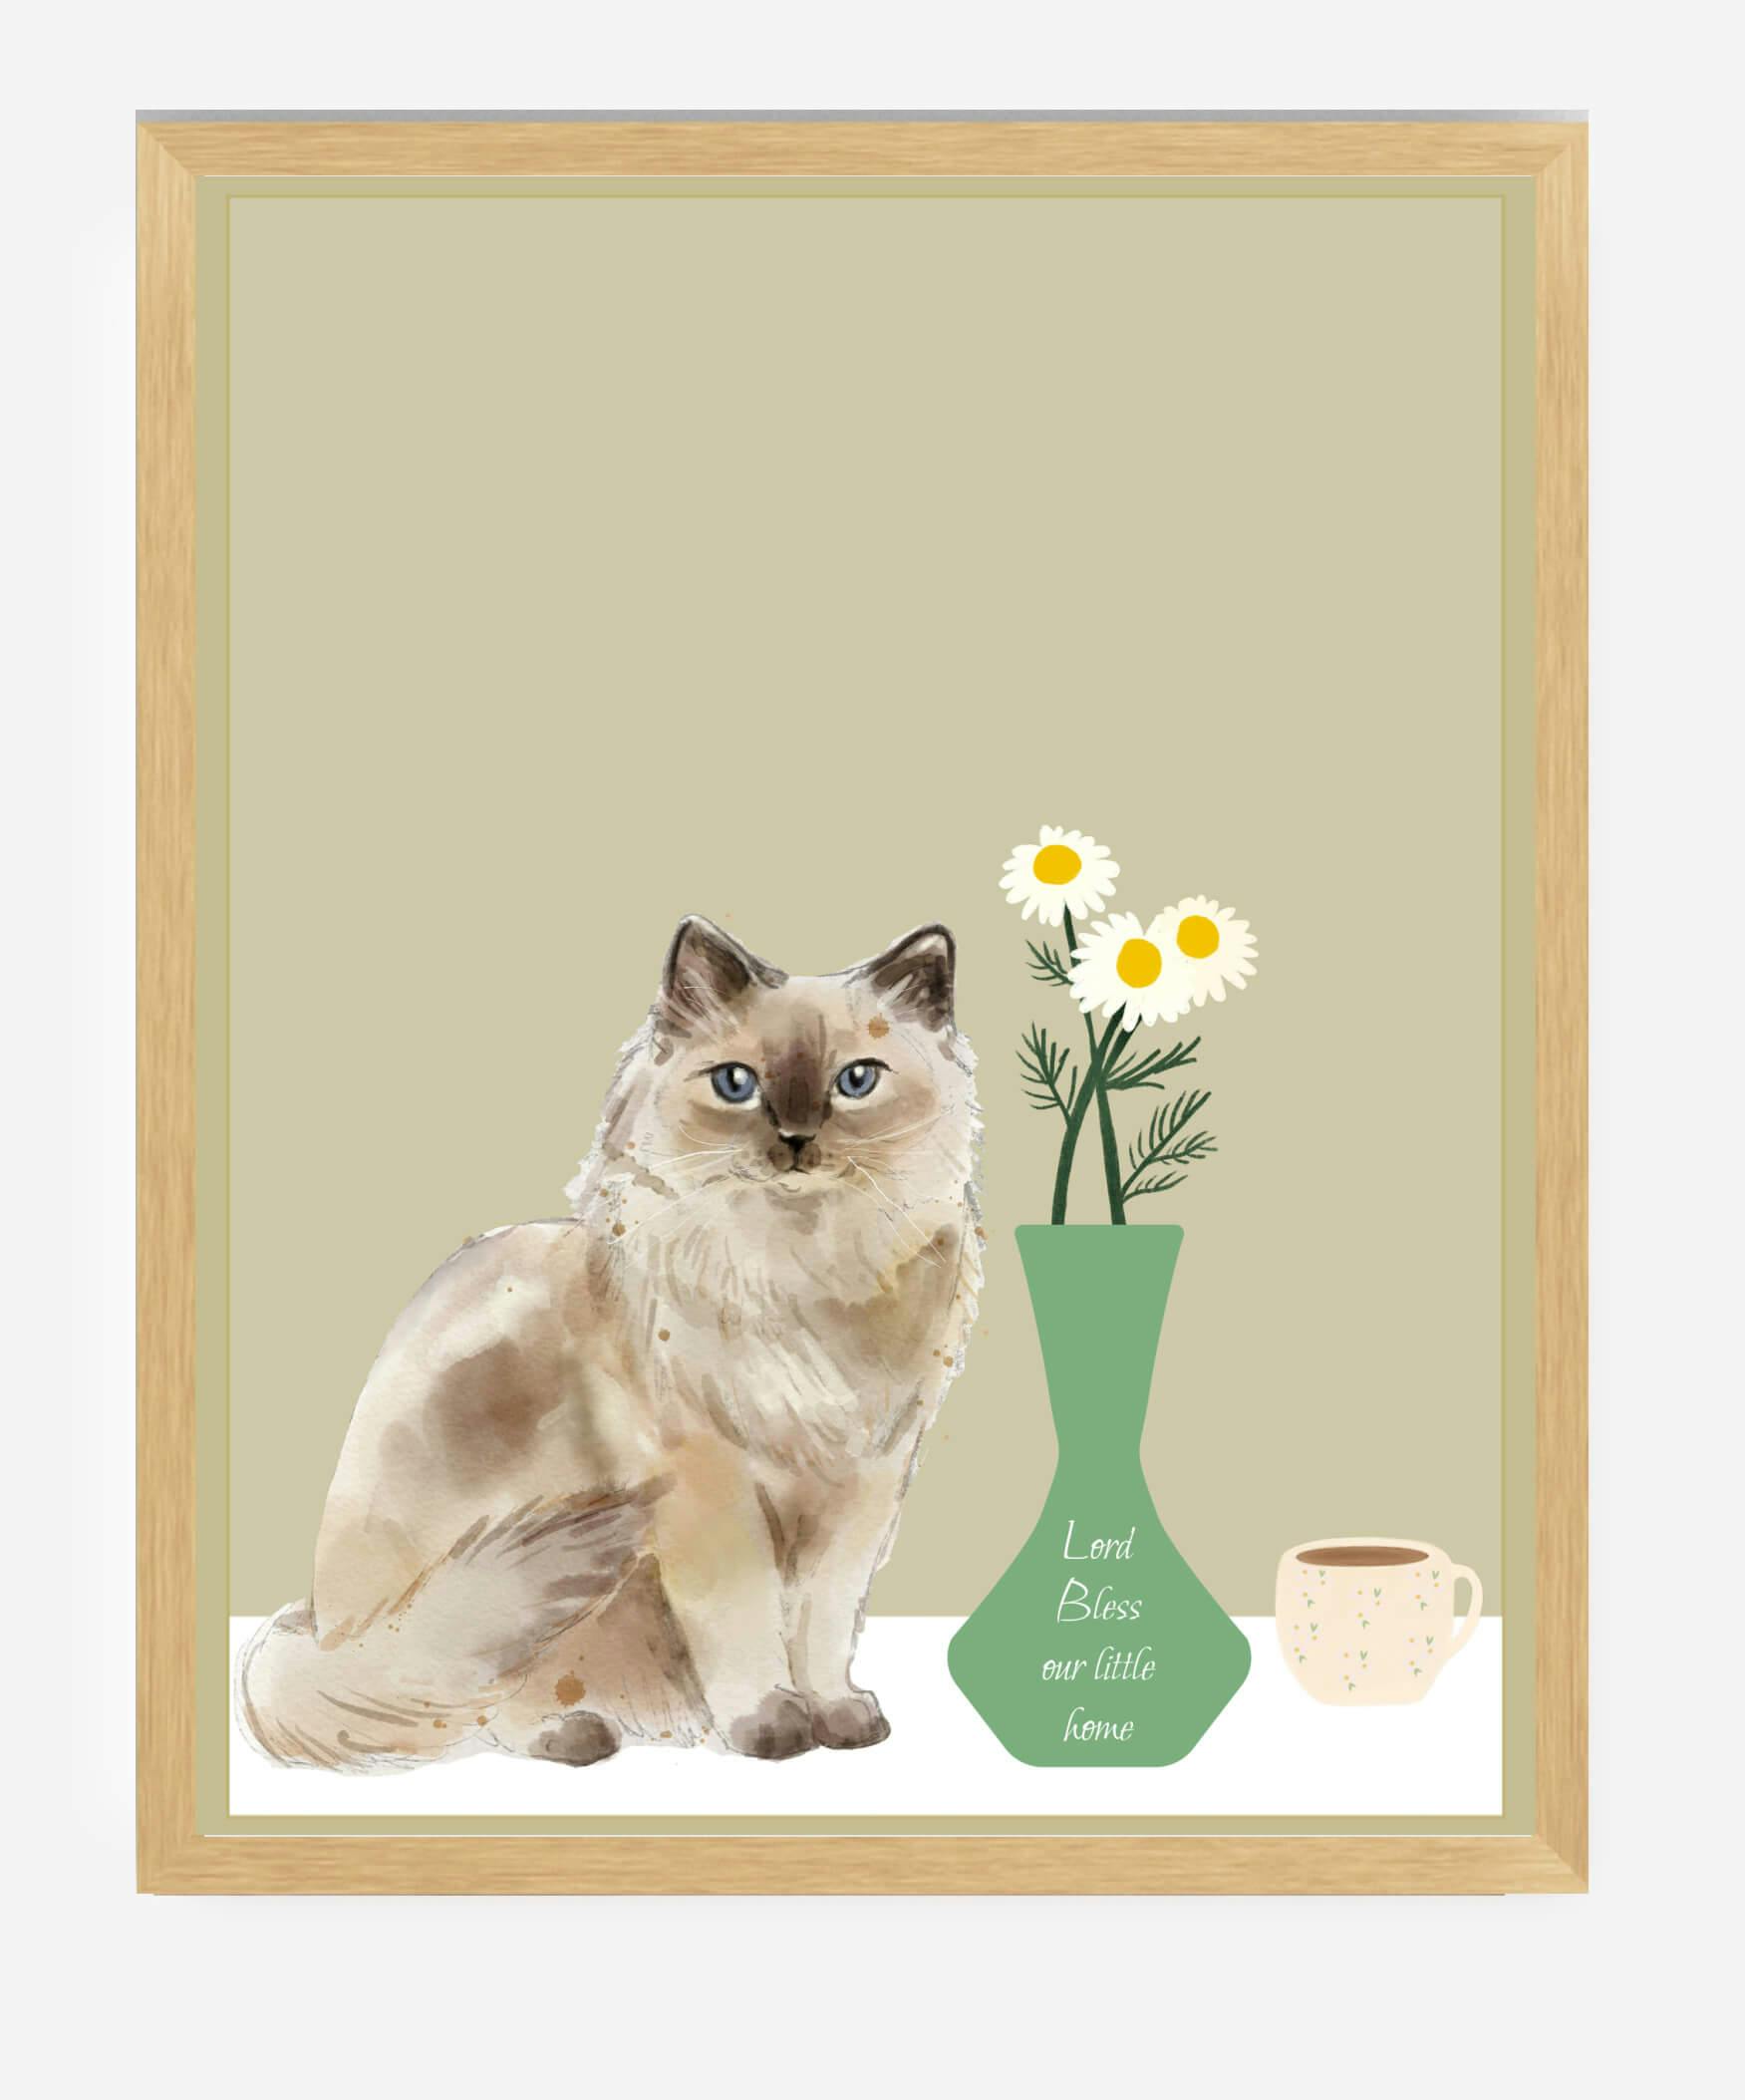 Cat & Daisies Art Print Lord Bless this little home Daisy Coffee Tea Mug Art Kitchen Art Eclectic Home Happy Home Art Print - undefined - bright side girl shoppe